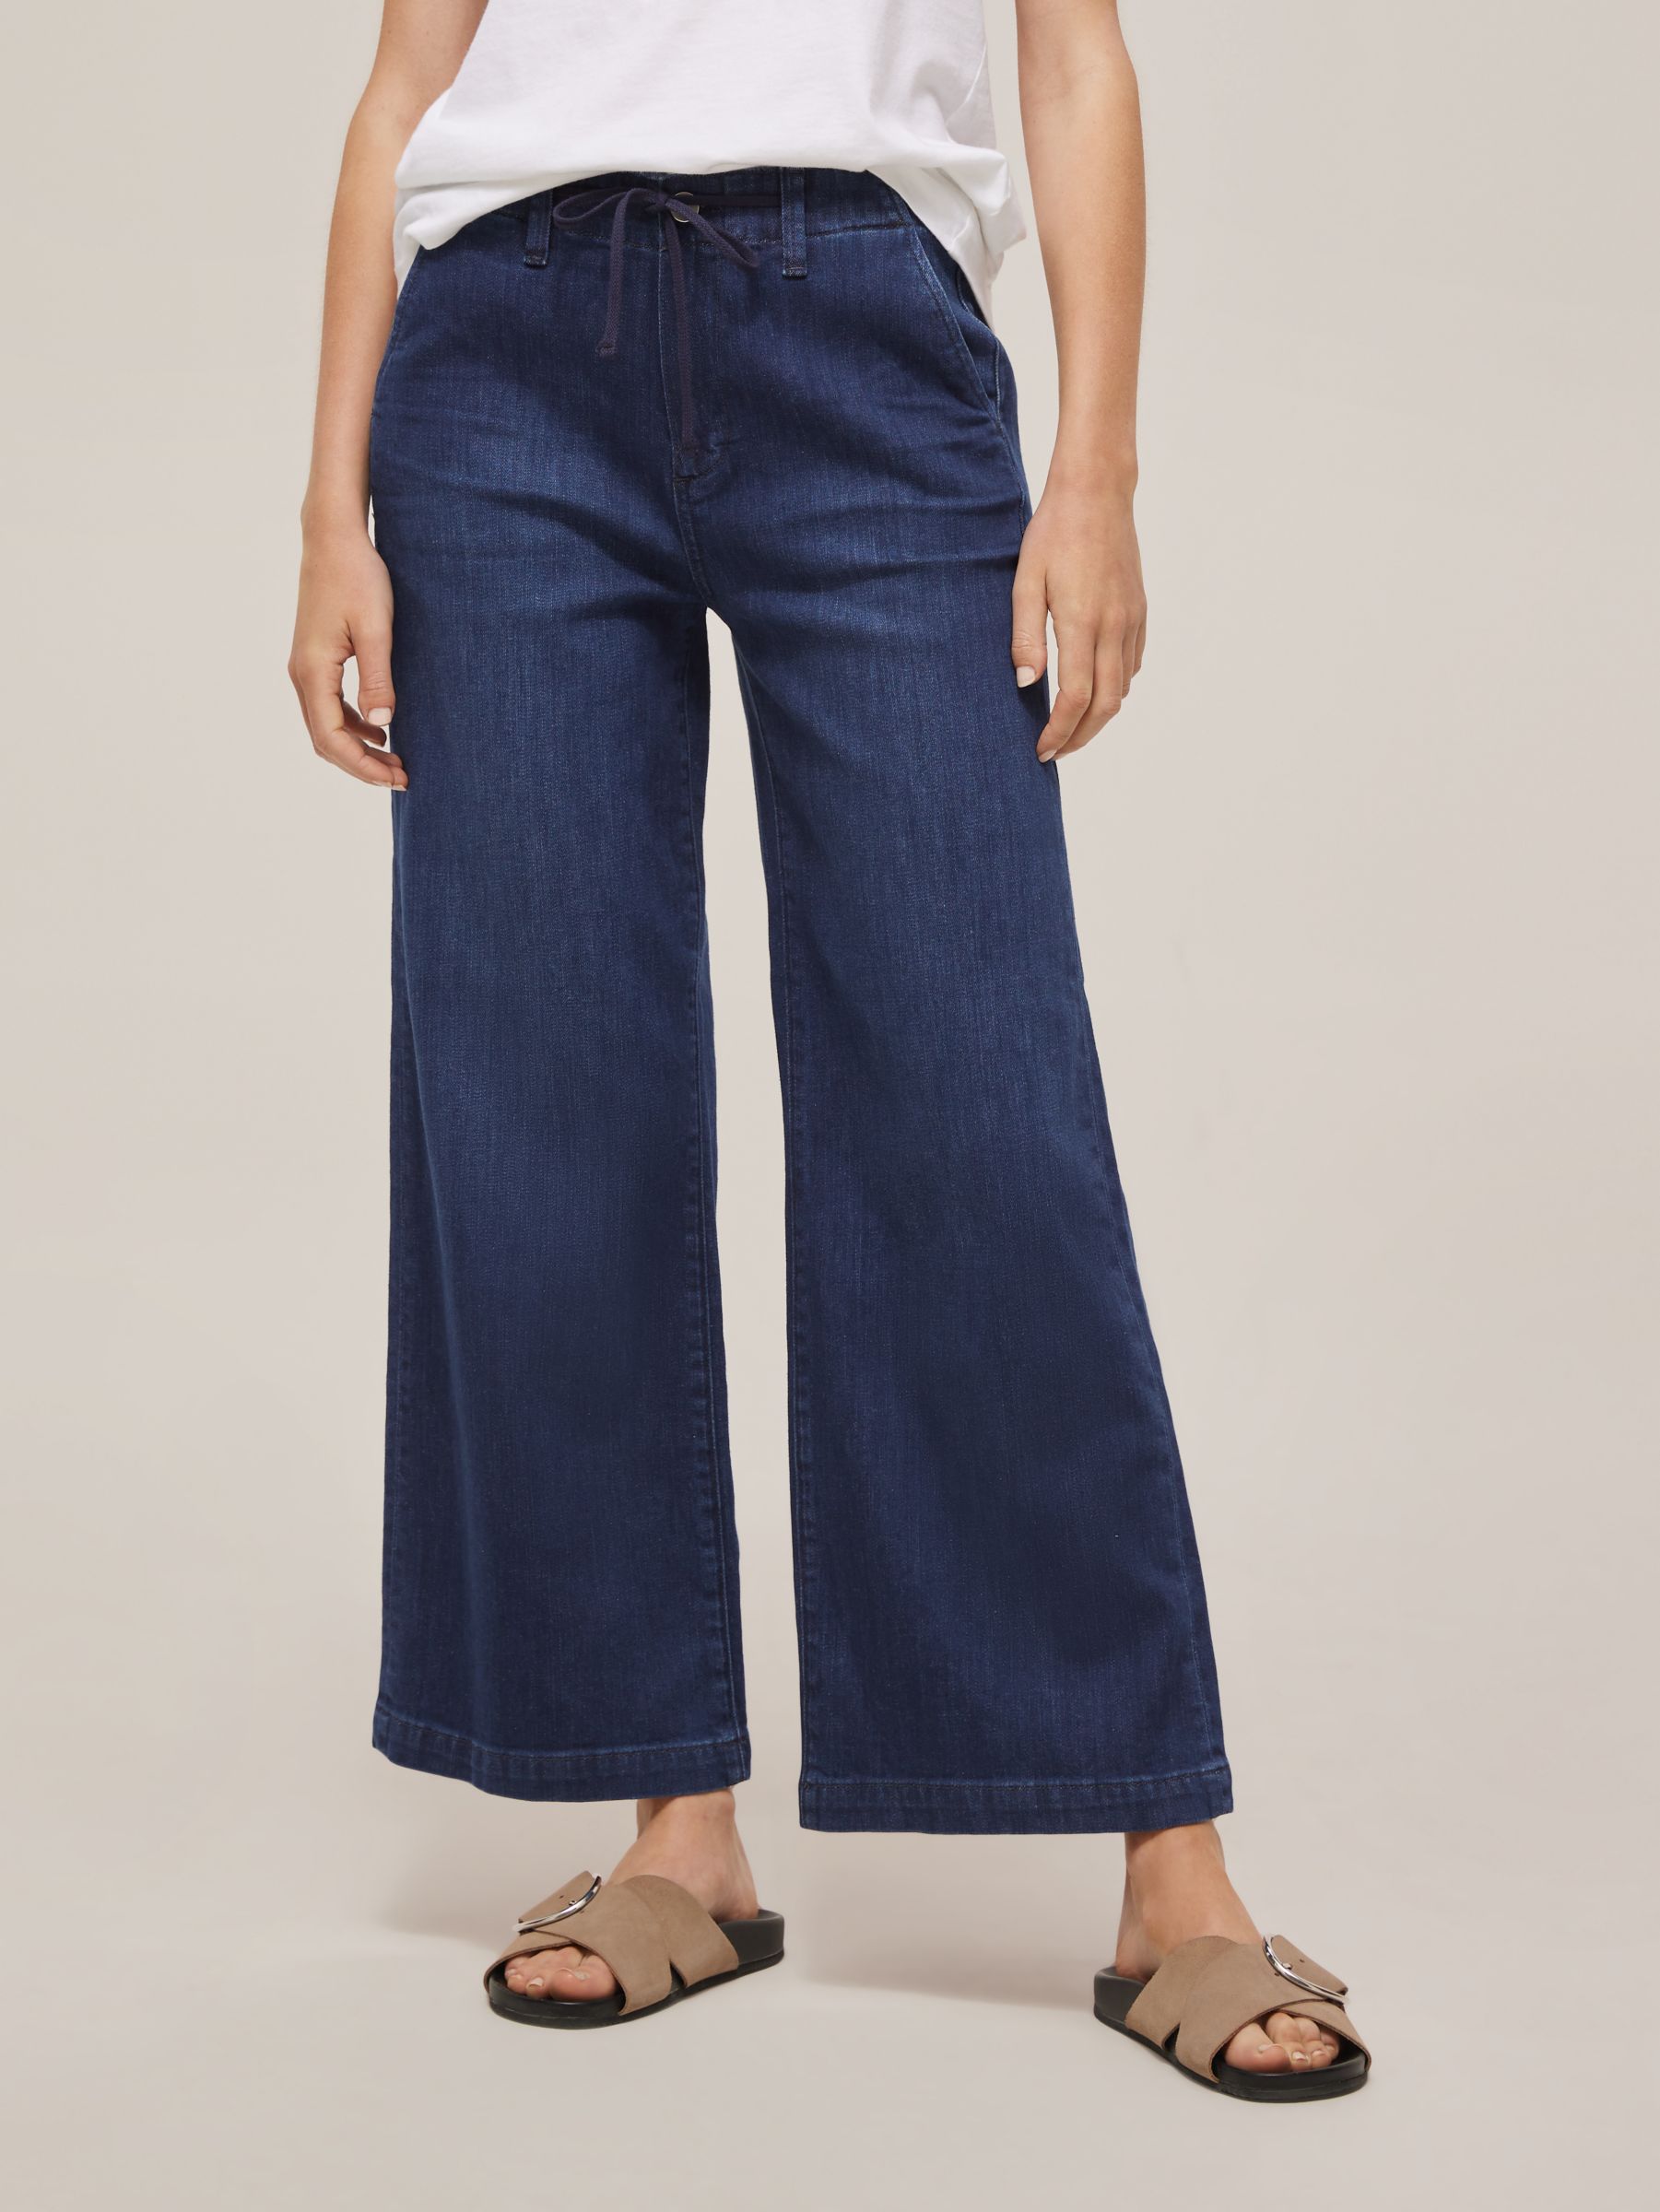 Paige Carly High Rise Wide Leg Jeans, Roya at John Lewis & Partners